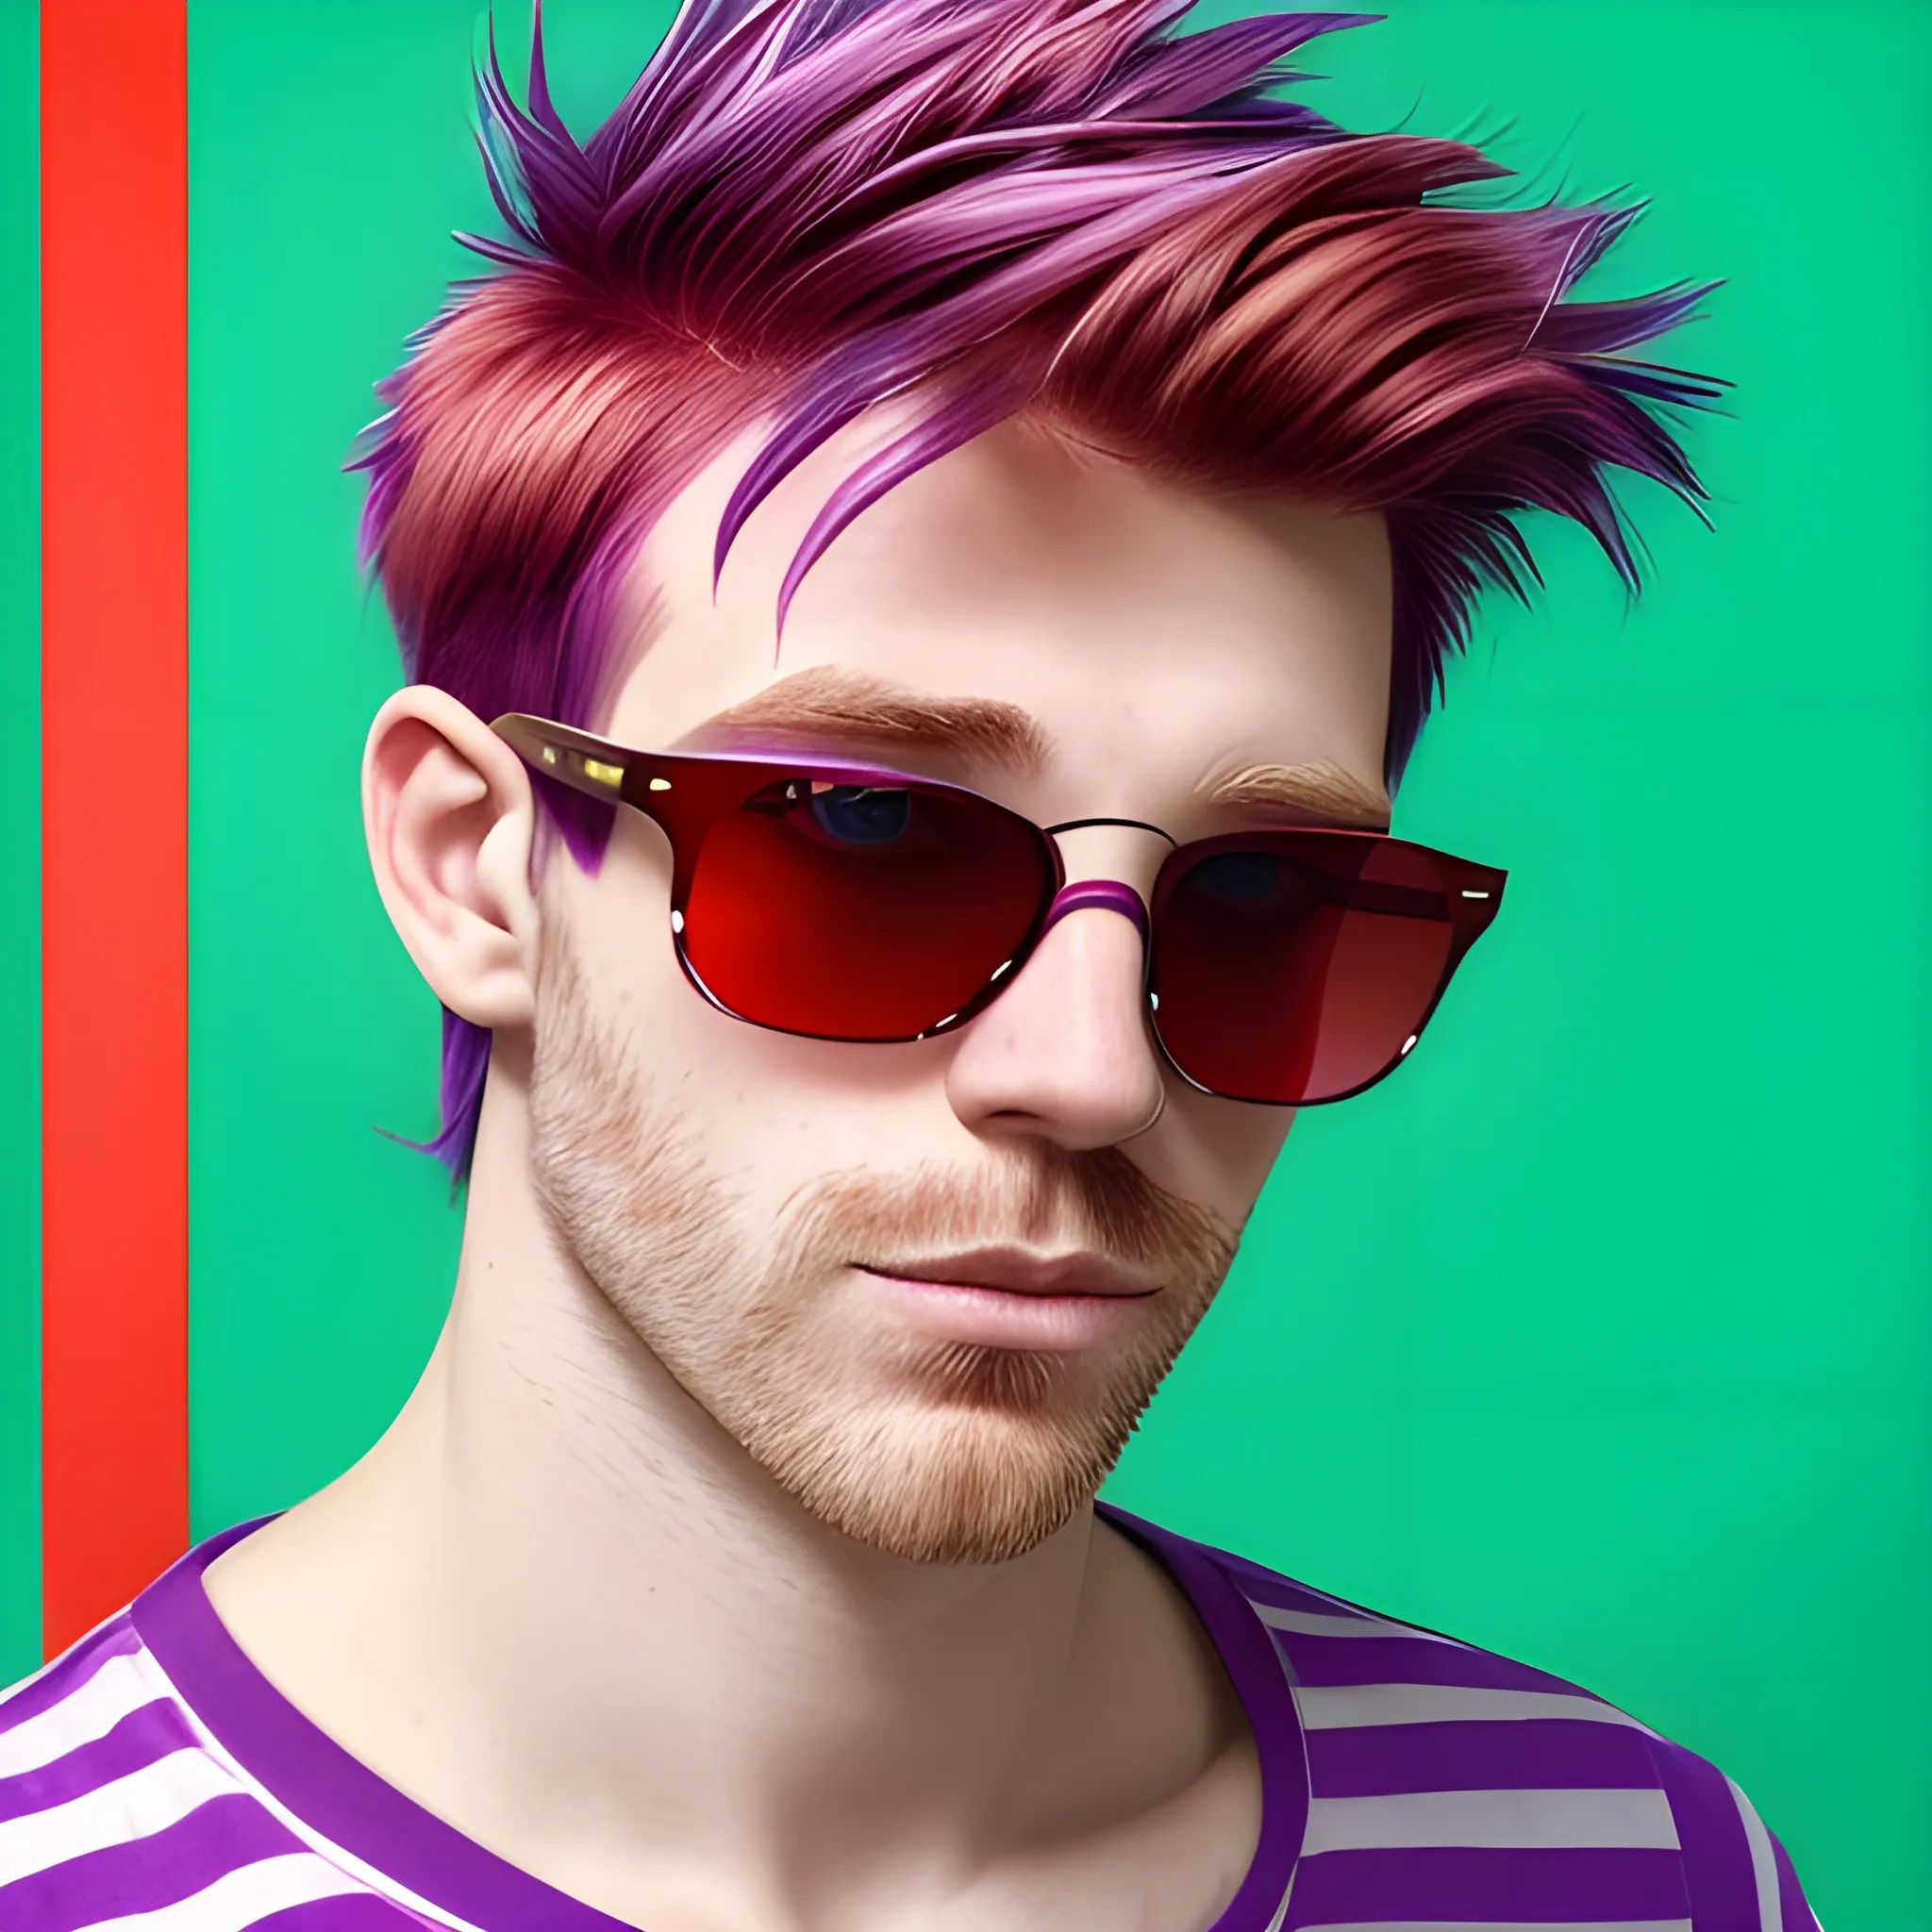 portrait of a Caucasian male no facial hair with red and purple striped hair wearing sunglasses.